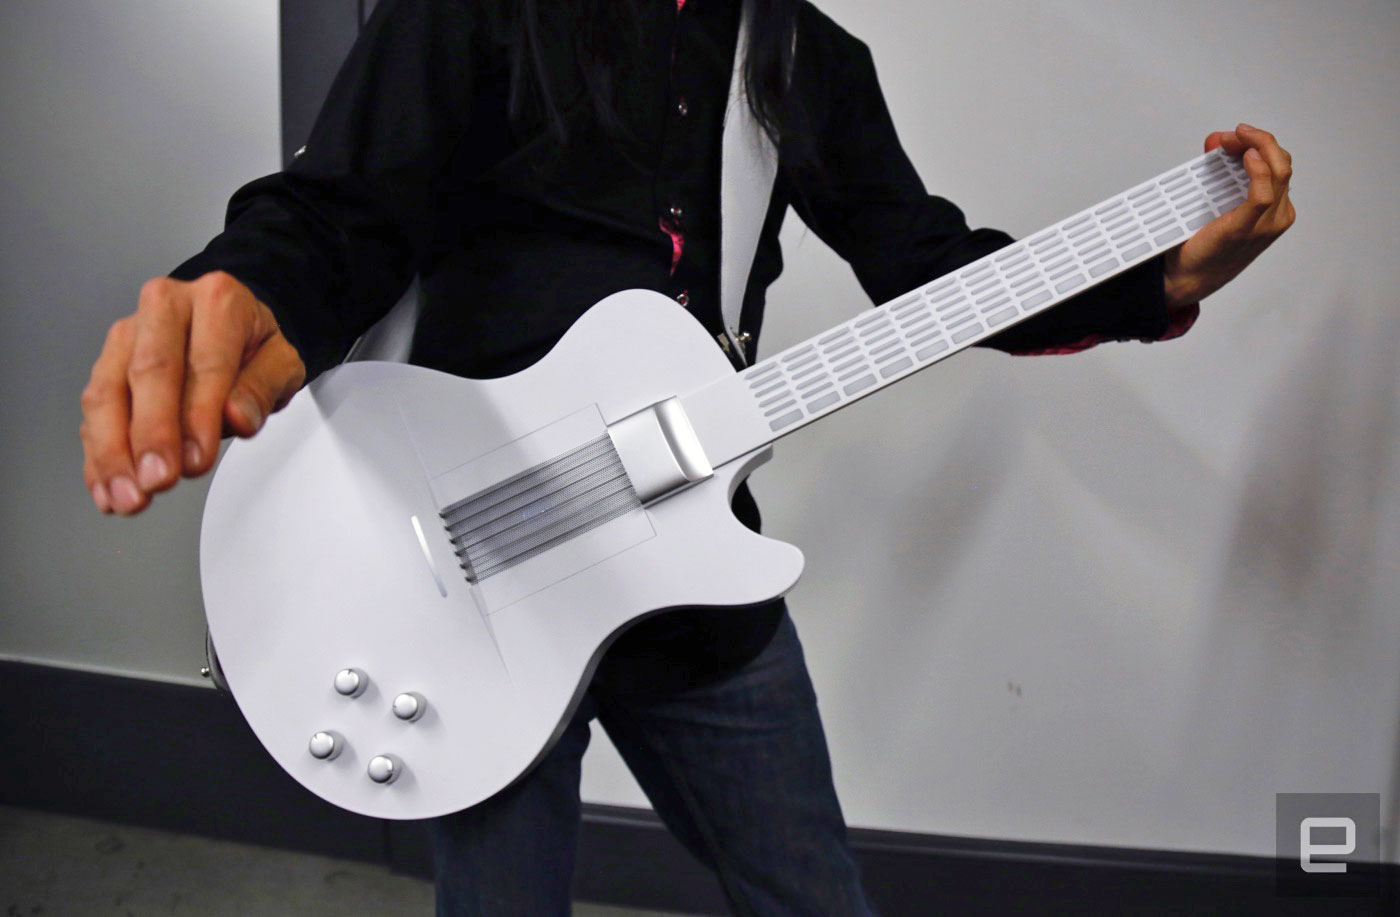 Magic Instruments' digital guitar makes it easy for anyone to jam